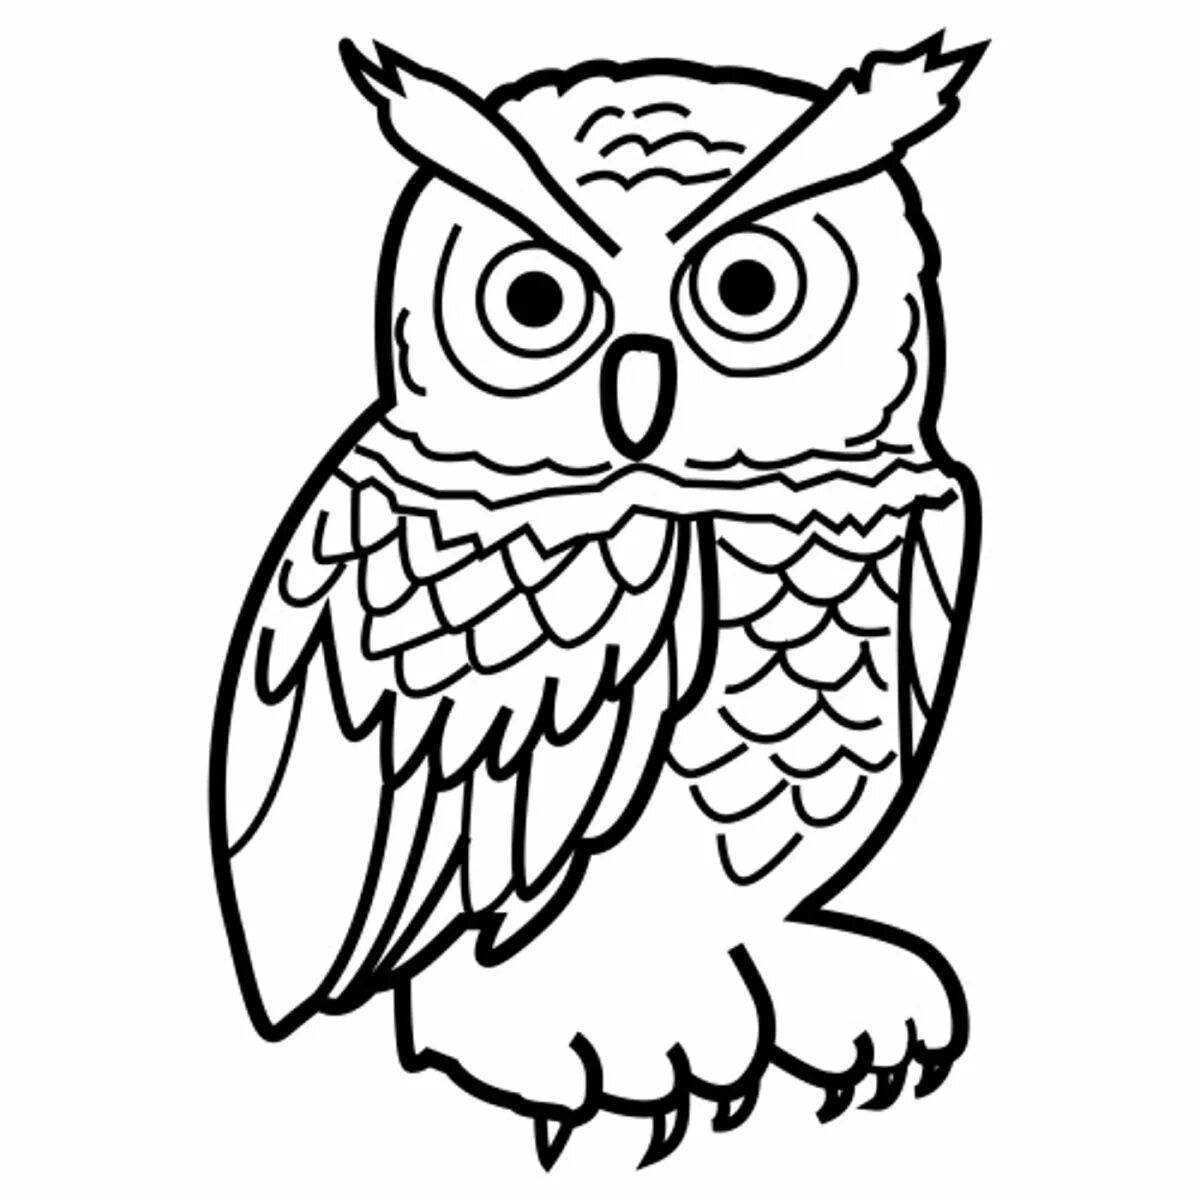 Live coloring with an image of an owl